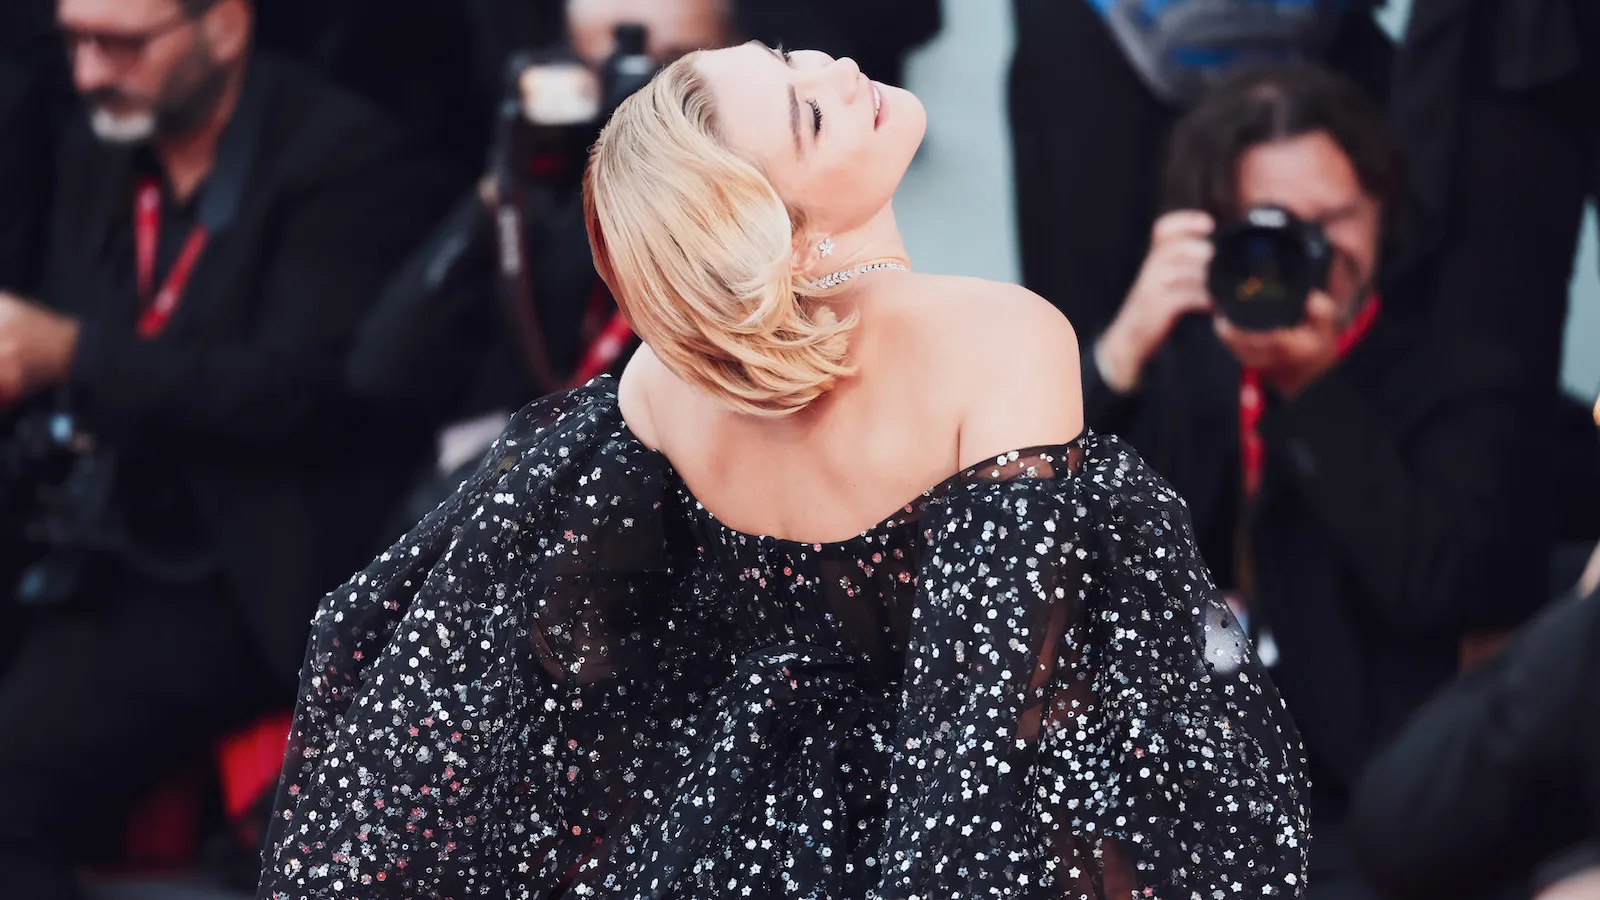 Best and Daring Celebrity Looks at the 2022 Cannes Film Festival